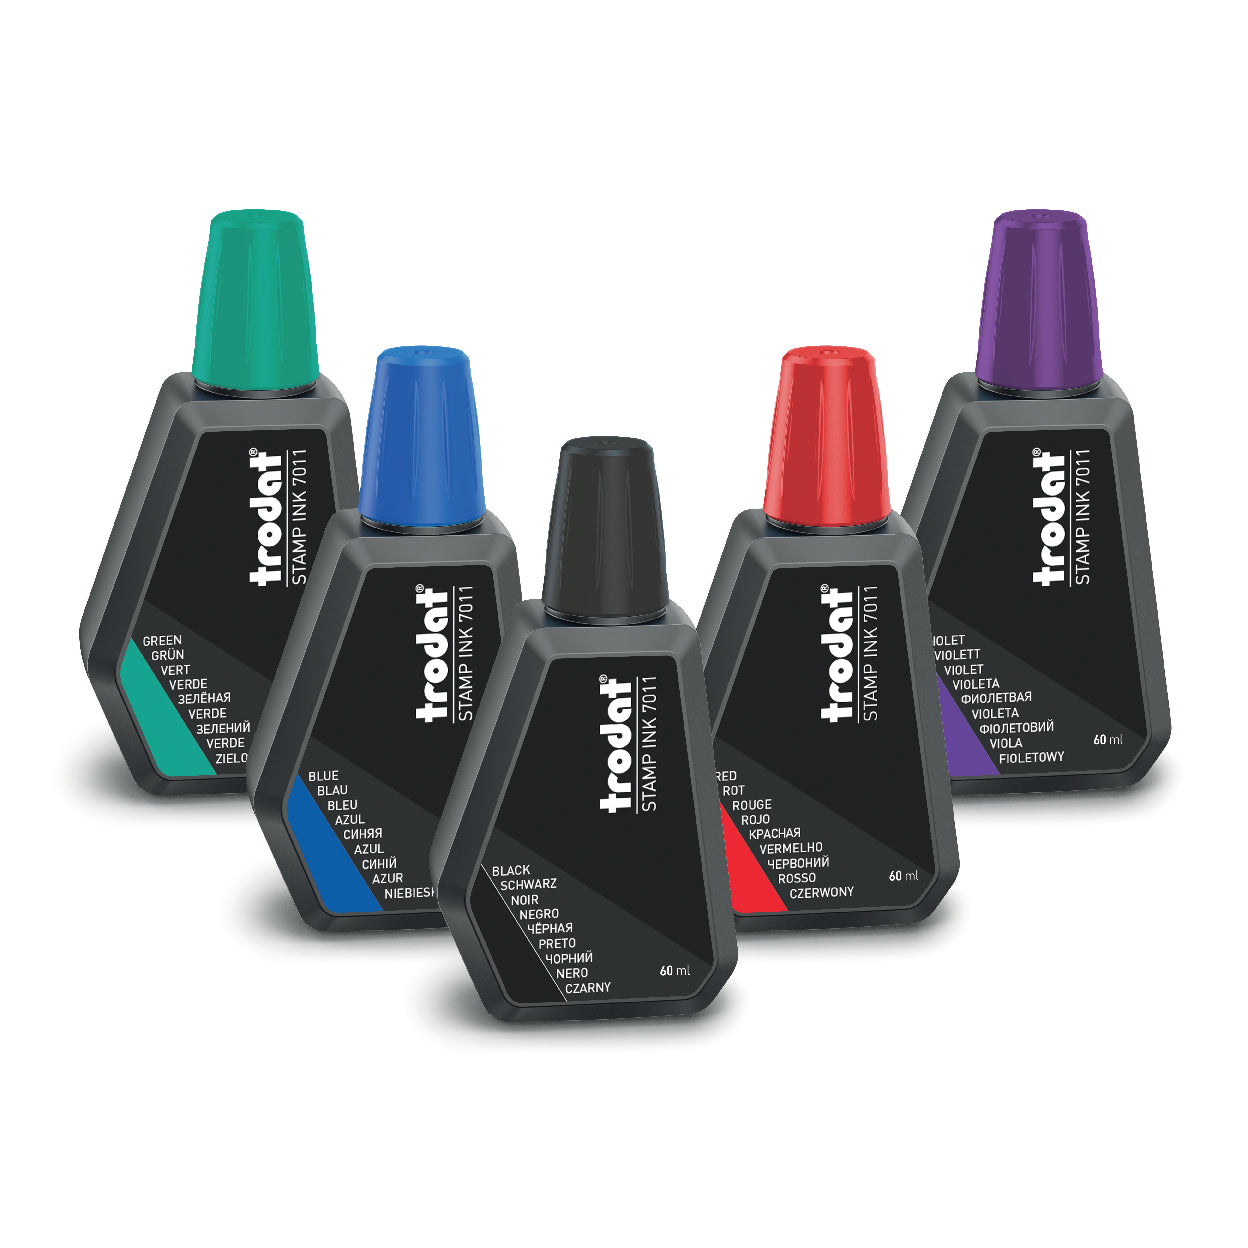 Buy Trodat Stamp Ink Refill – 2 oz Available in 5 colors!